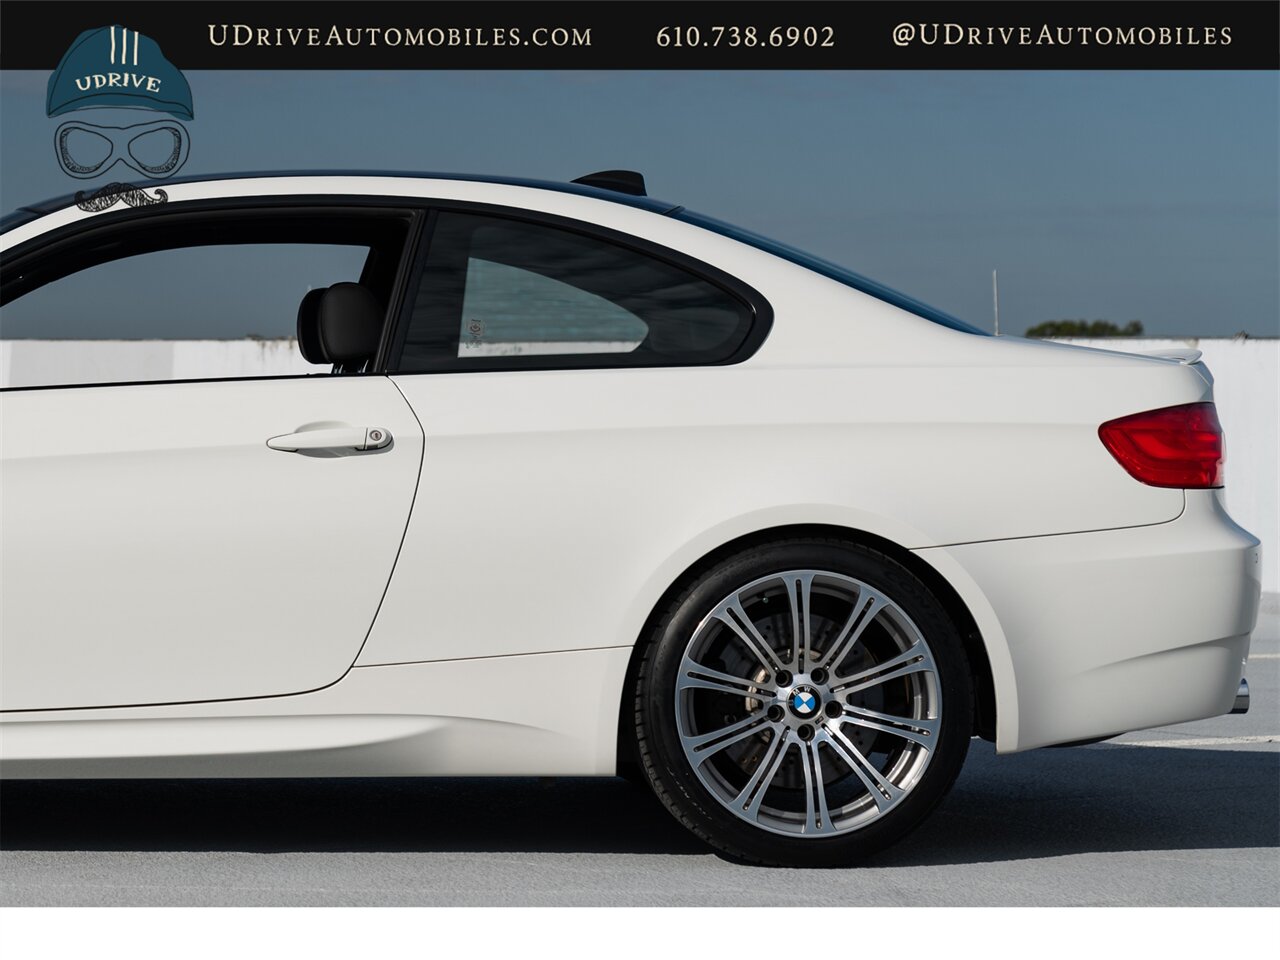 2011 BMW M3  No Nav Carbon Roof Comf Acc 19in Whls 11k Miles - Photo 25 - West Chester, PA 19382